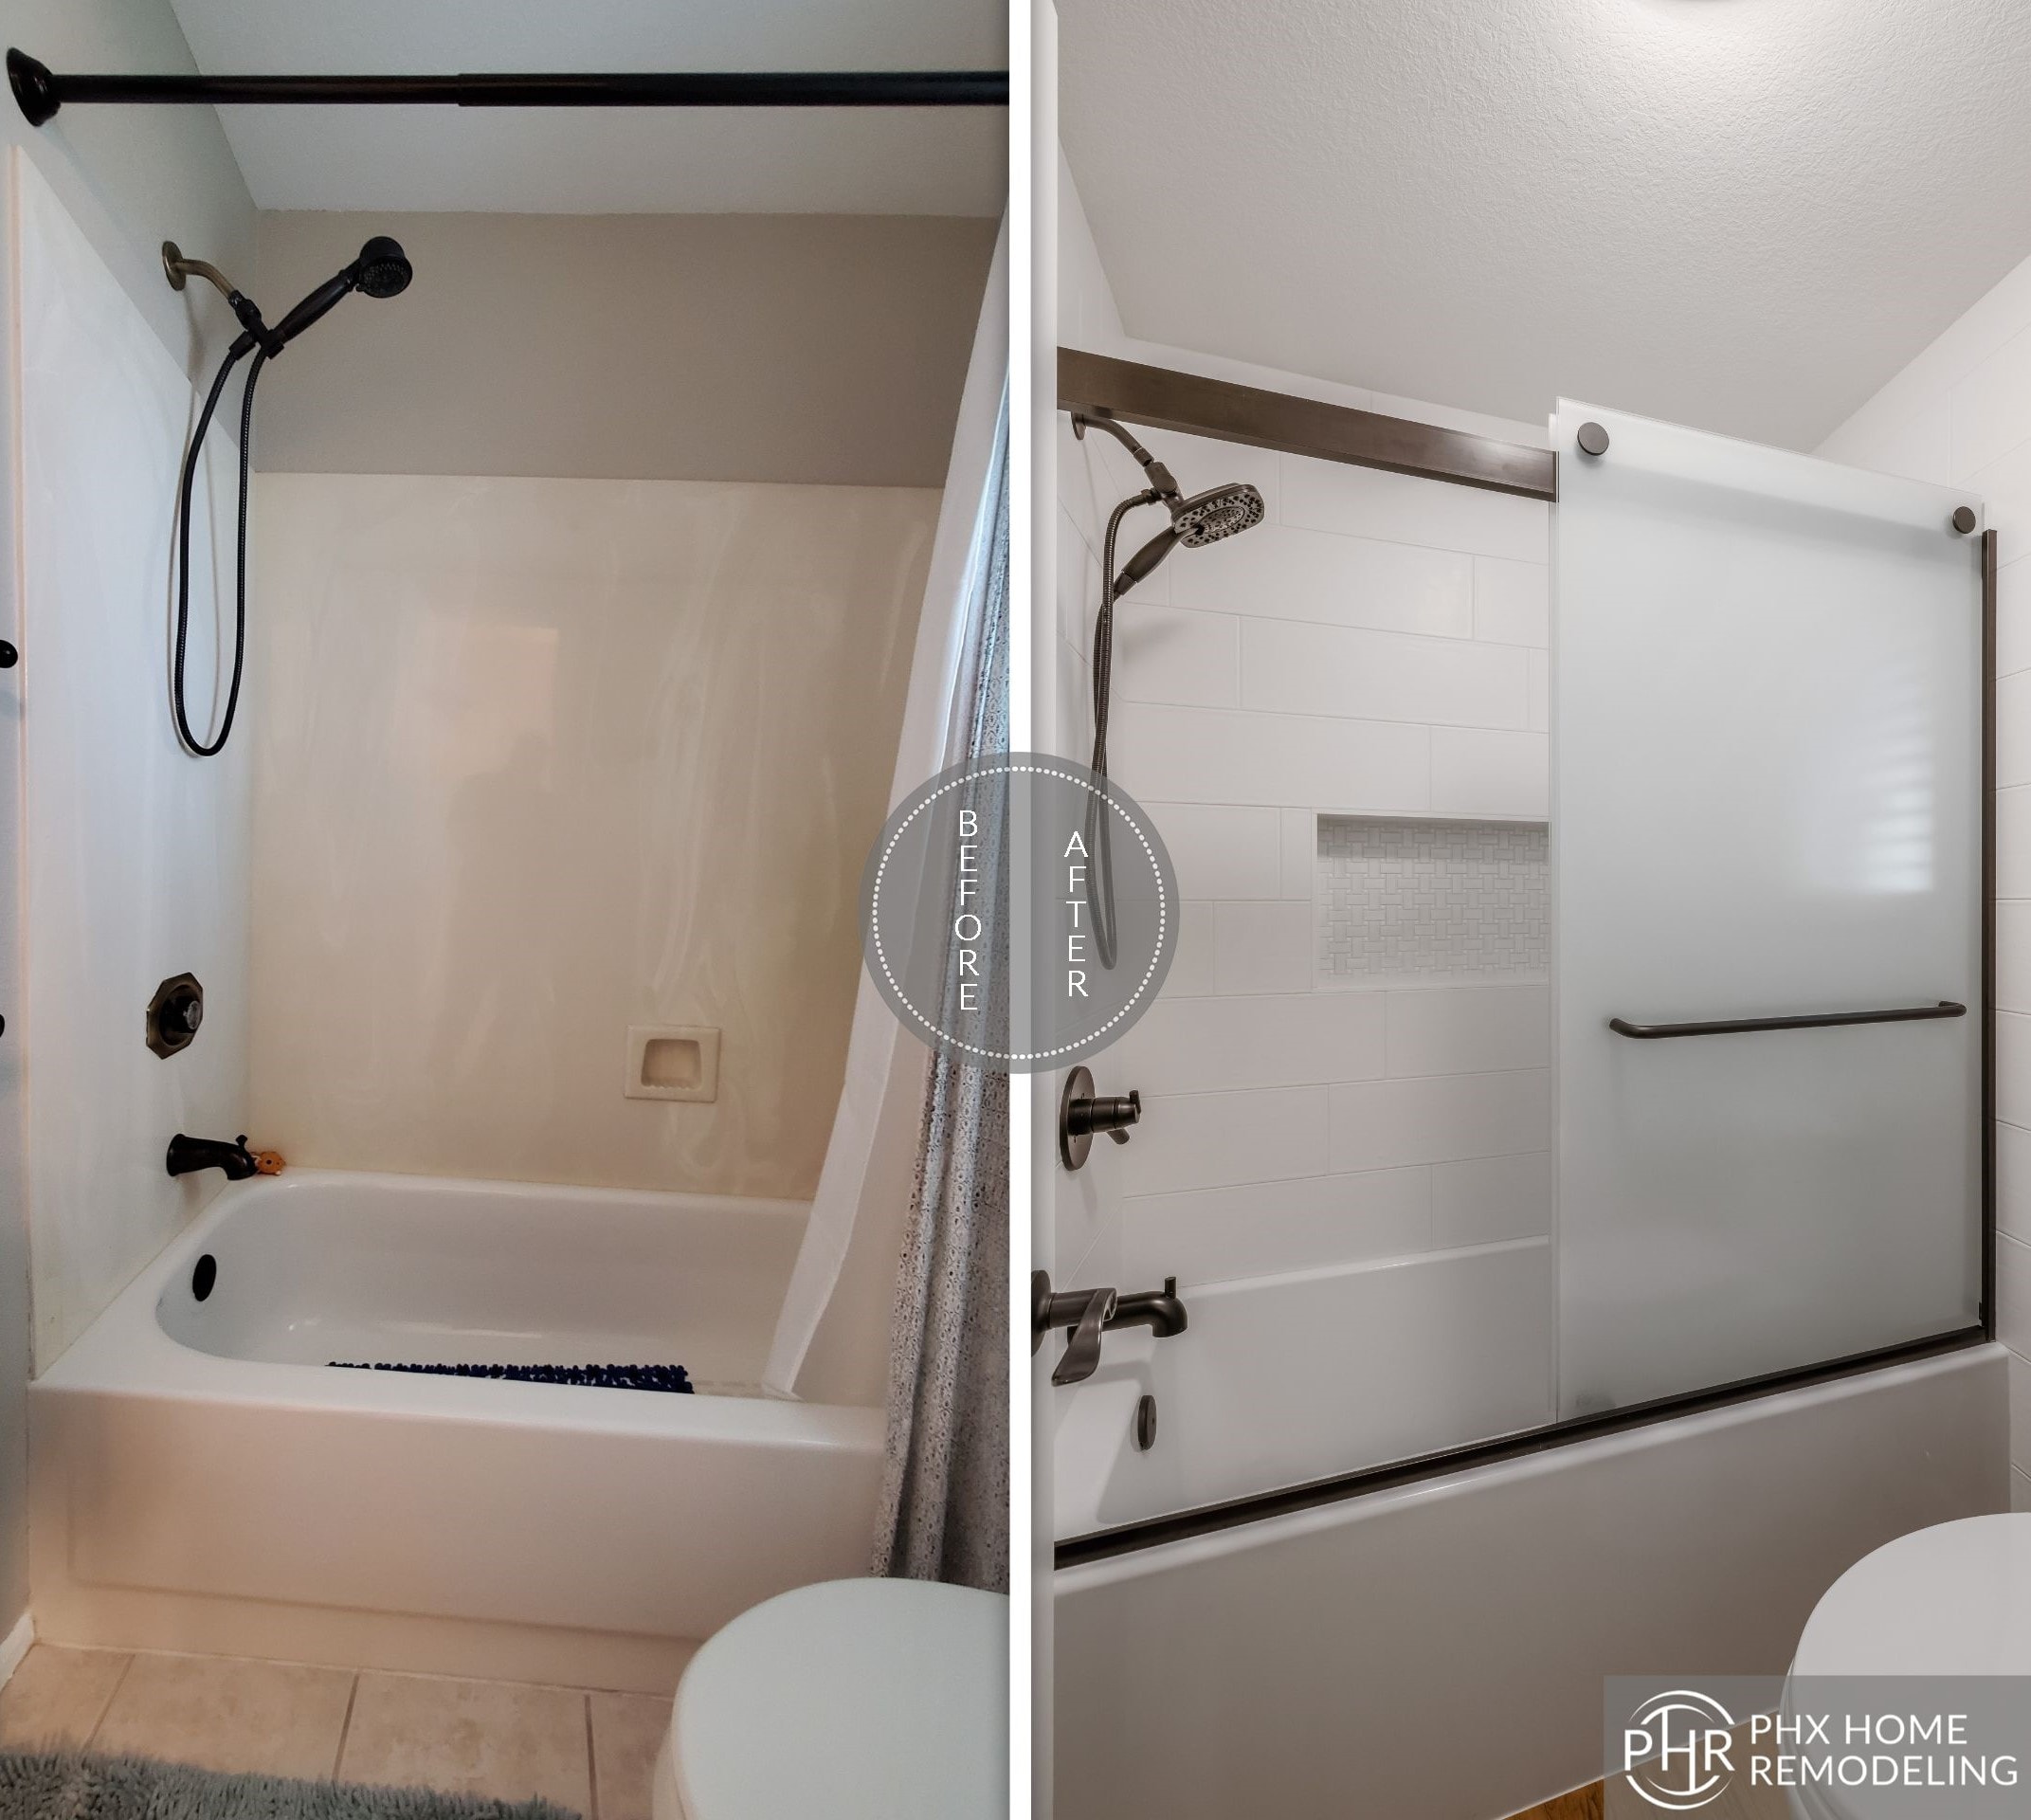 new shower bathtub remodeling happening before and after photo